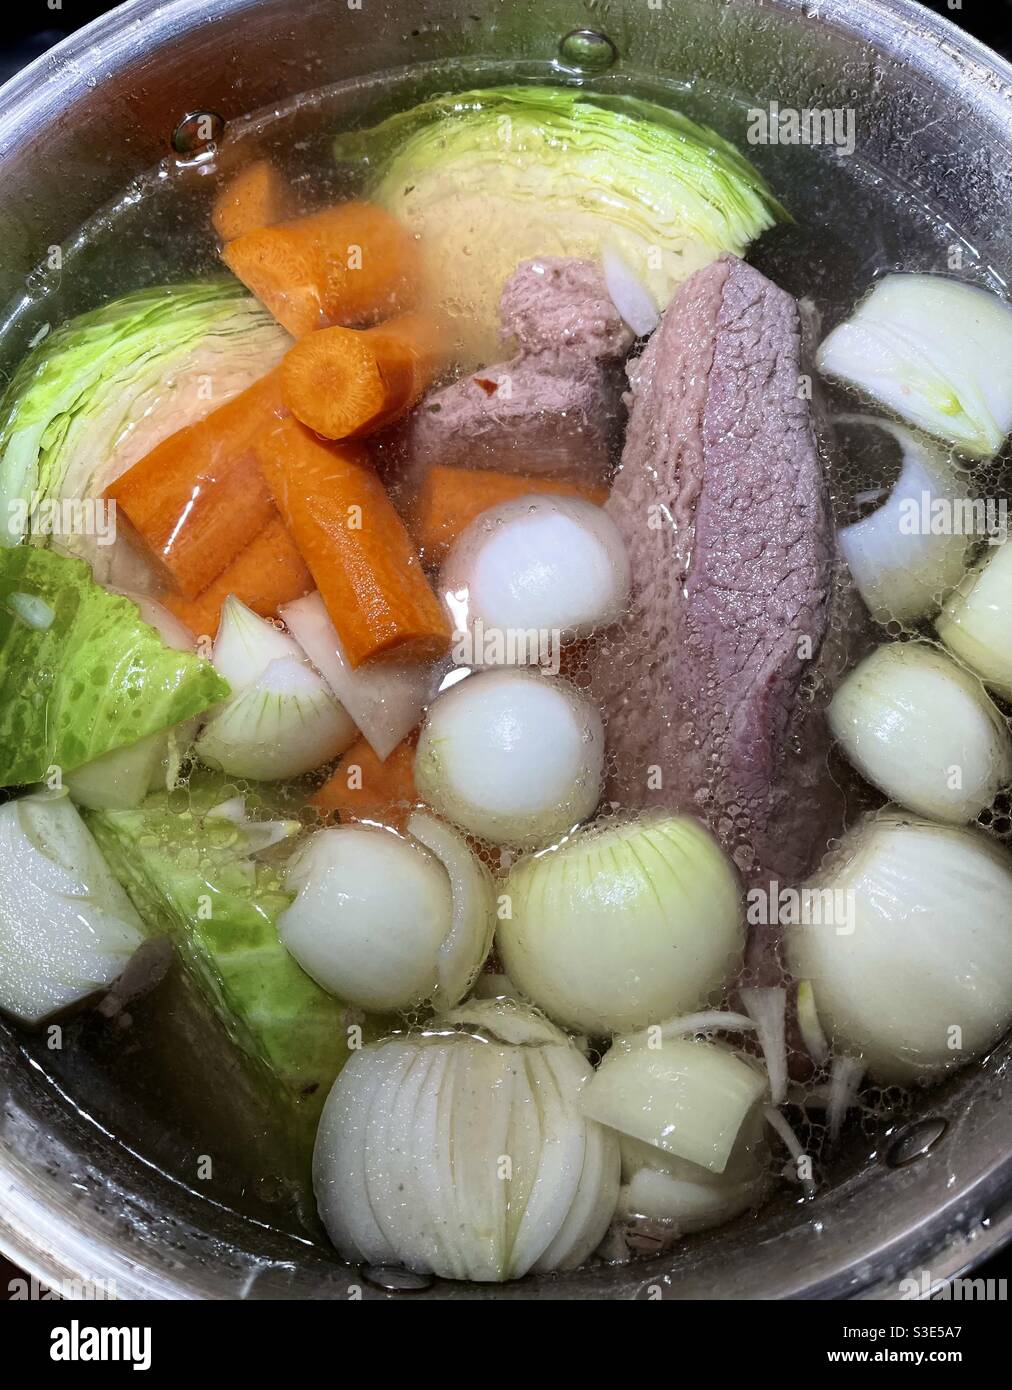 Traditional Irish boiled dinner with corned beef, carrots, potatoes and onions. Stock Photo